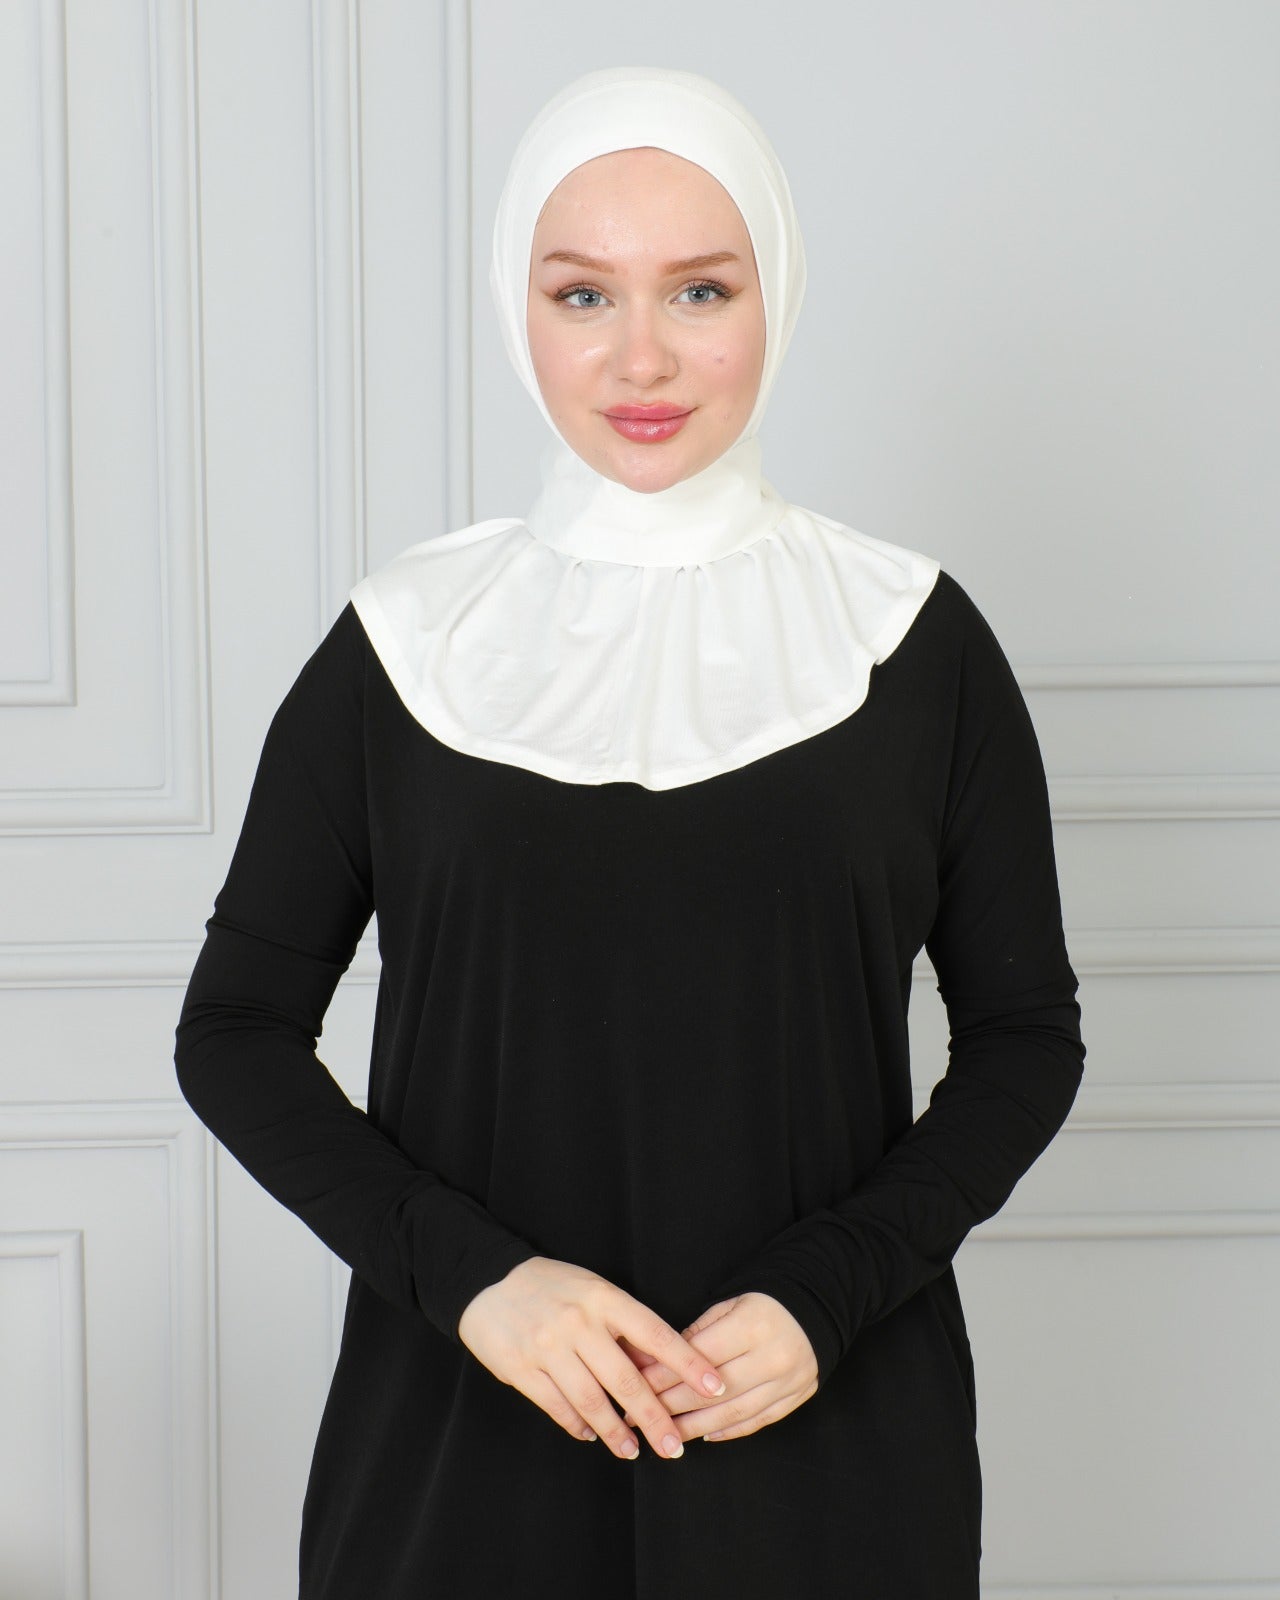 Pull on Instant Hijab